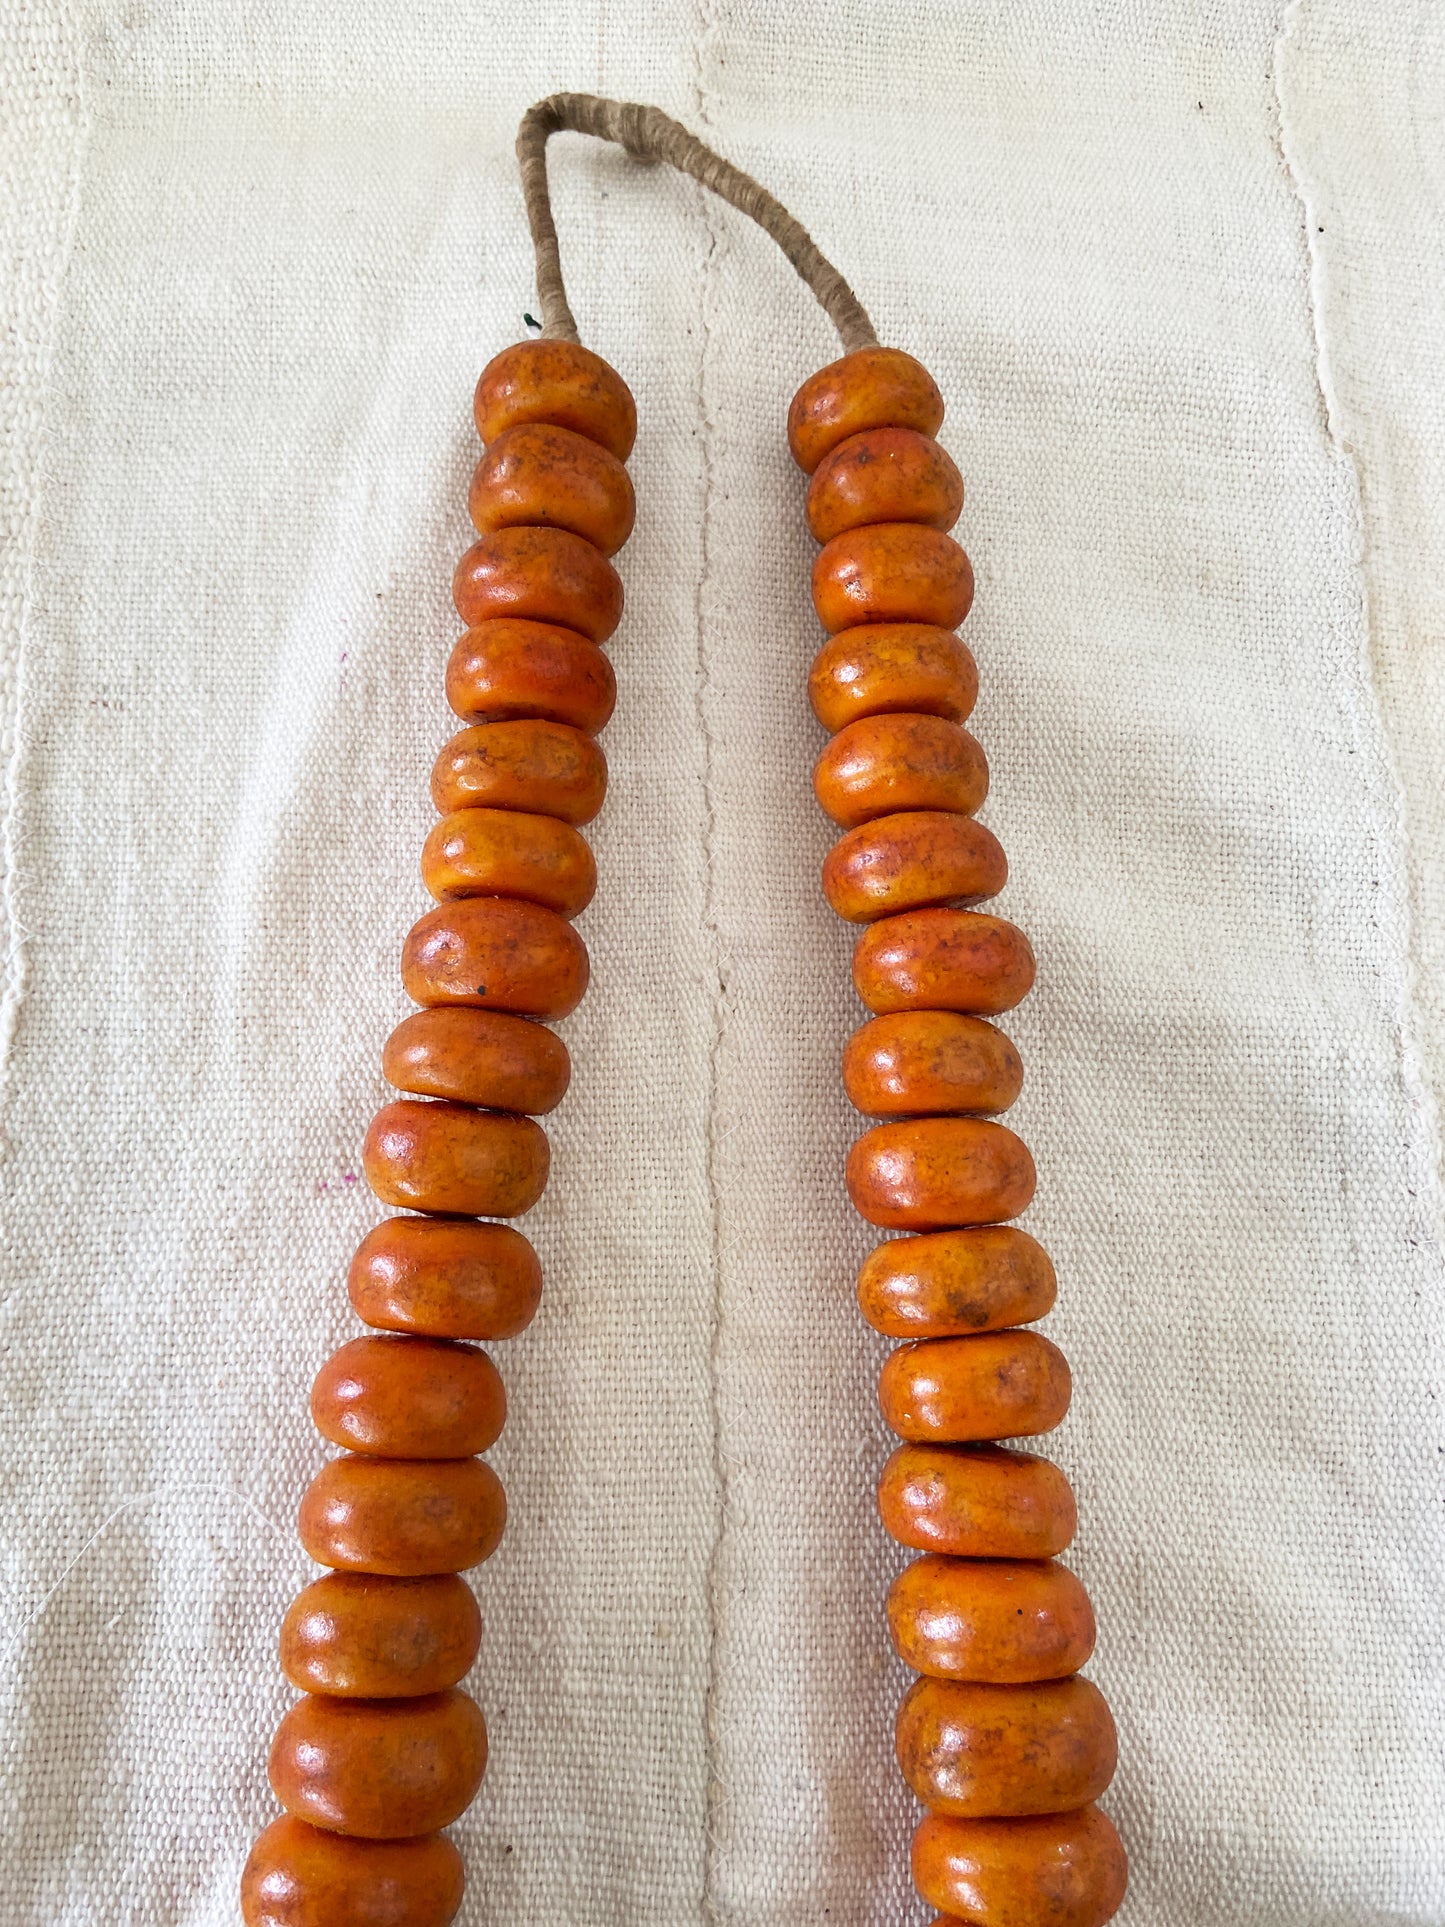 Superb Vintage African Simulated Amber Necklace W/ 50 Trade Beads